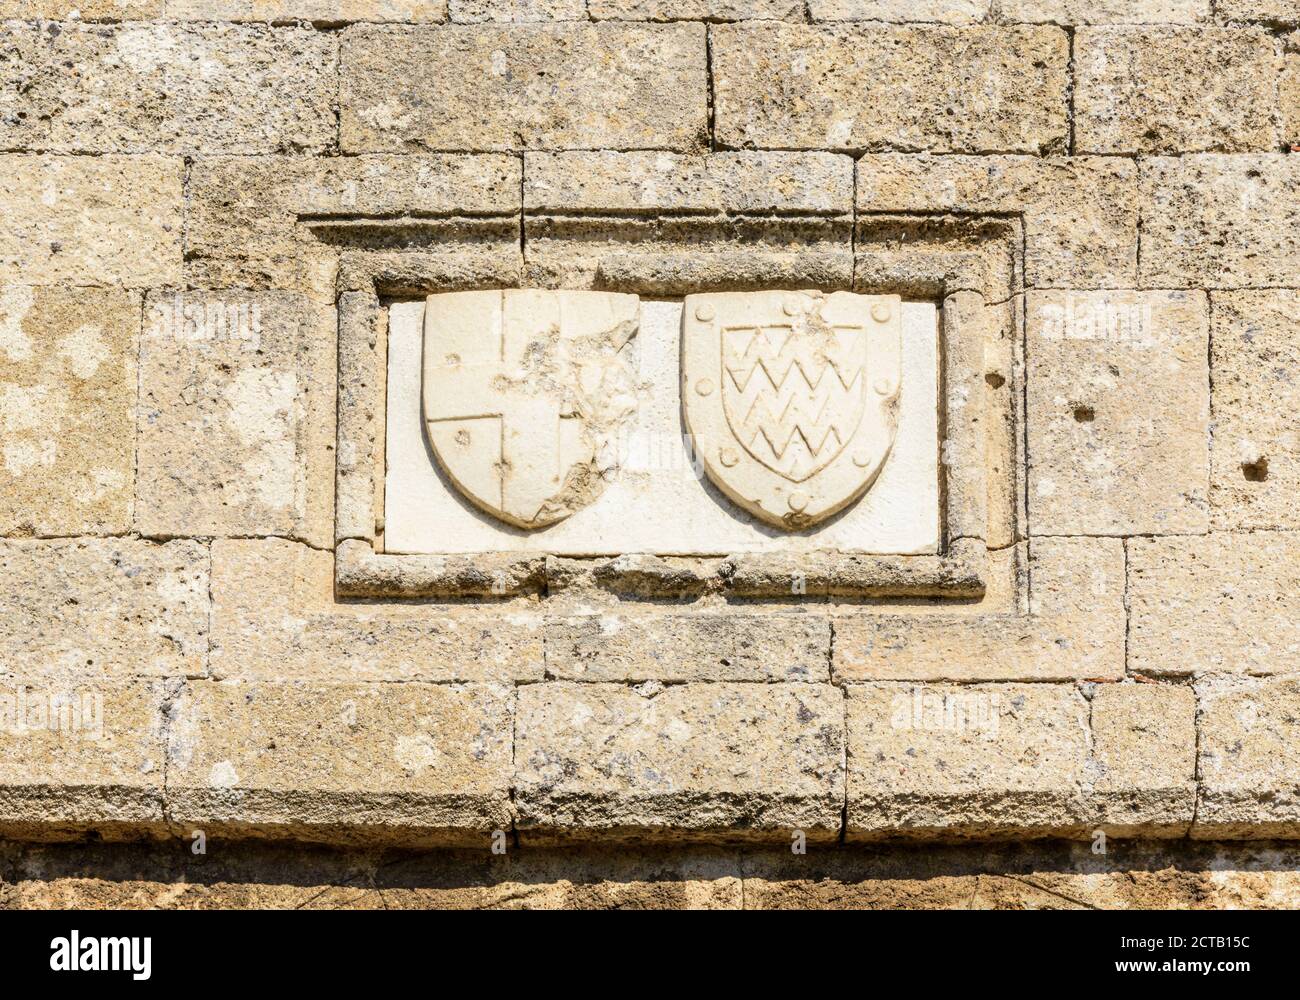 Coats of Arms above the inner gate of Saint John on the old bastion, Rhodes Old Town, Rhodes, Greece Stock Photo